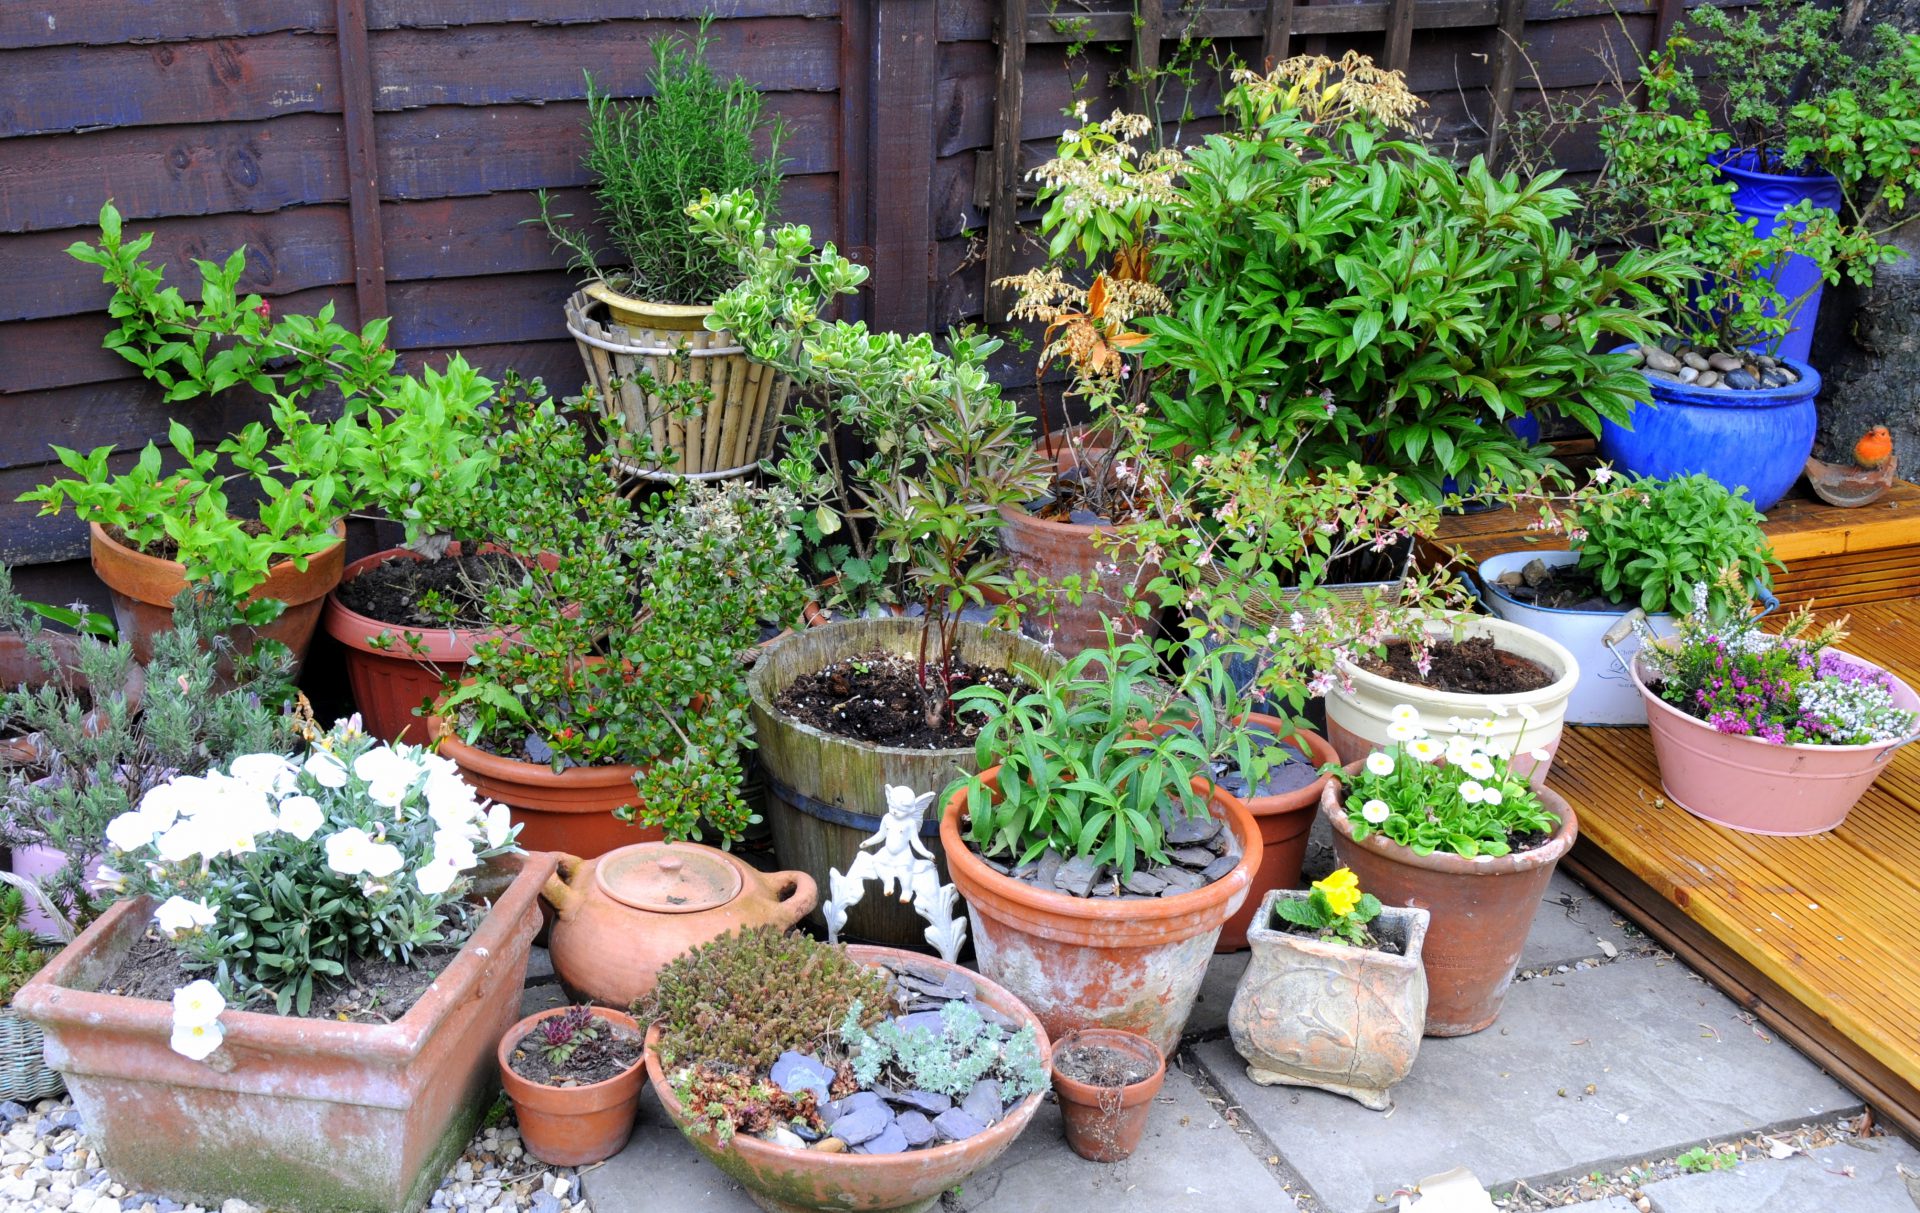 Variety of potted garden plants on patio.